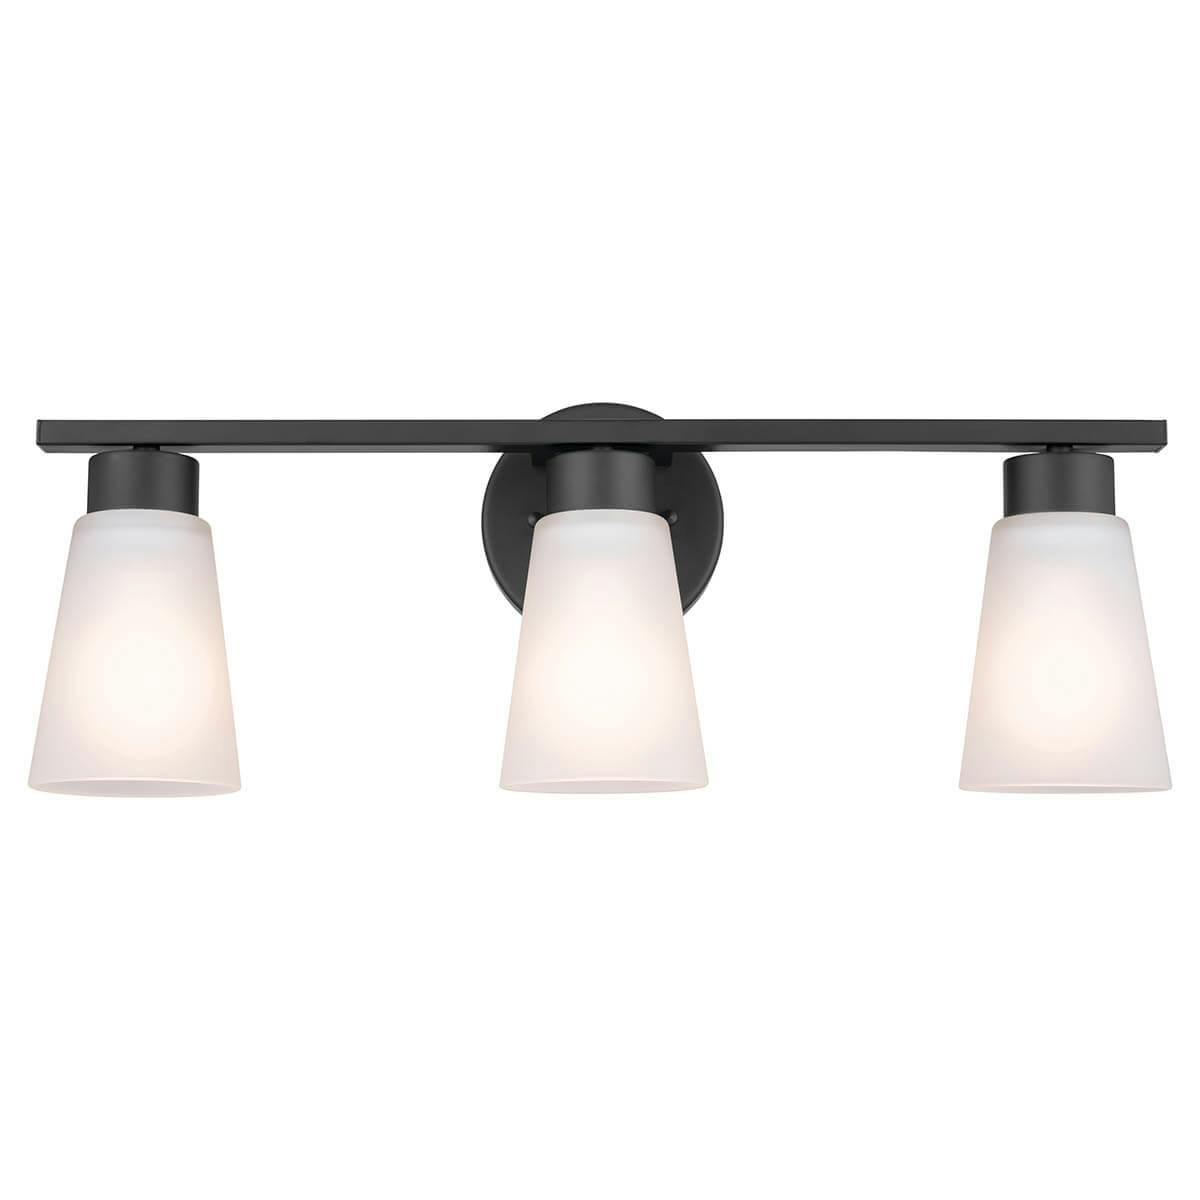 Front view of the Stamos 20" 3 Light Vanity Light Black on a white background